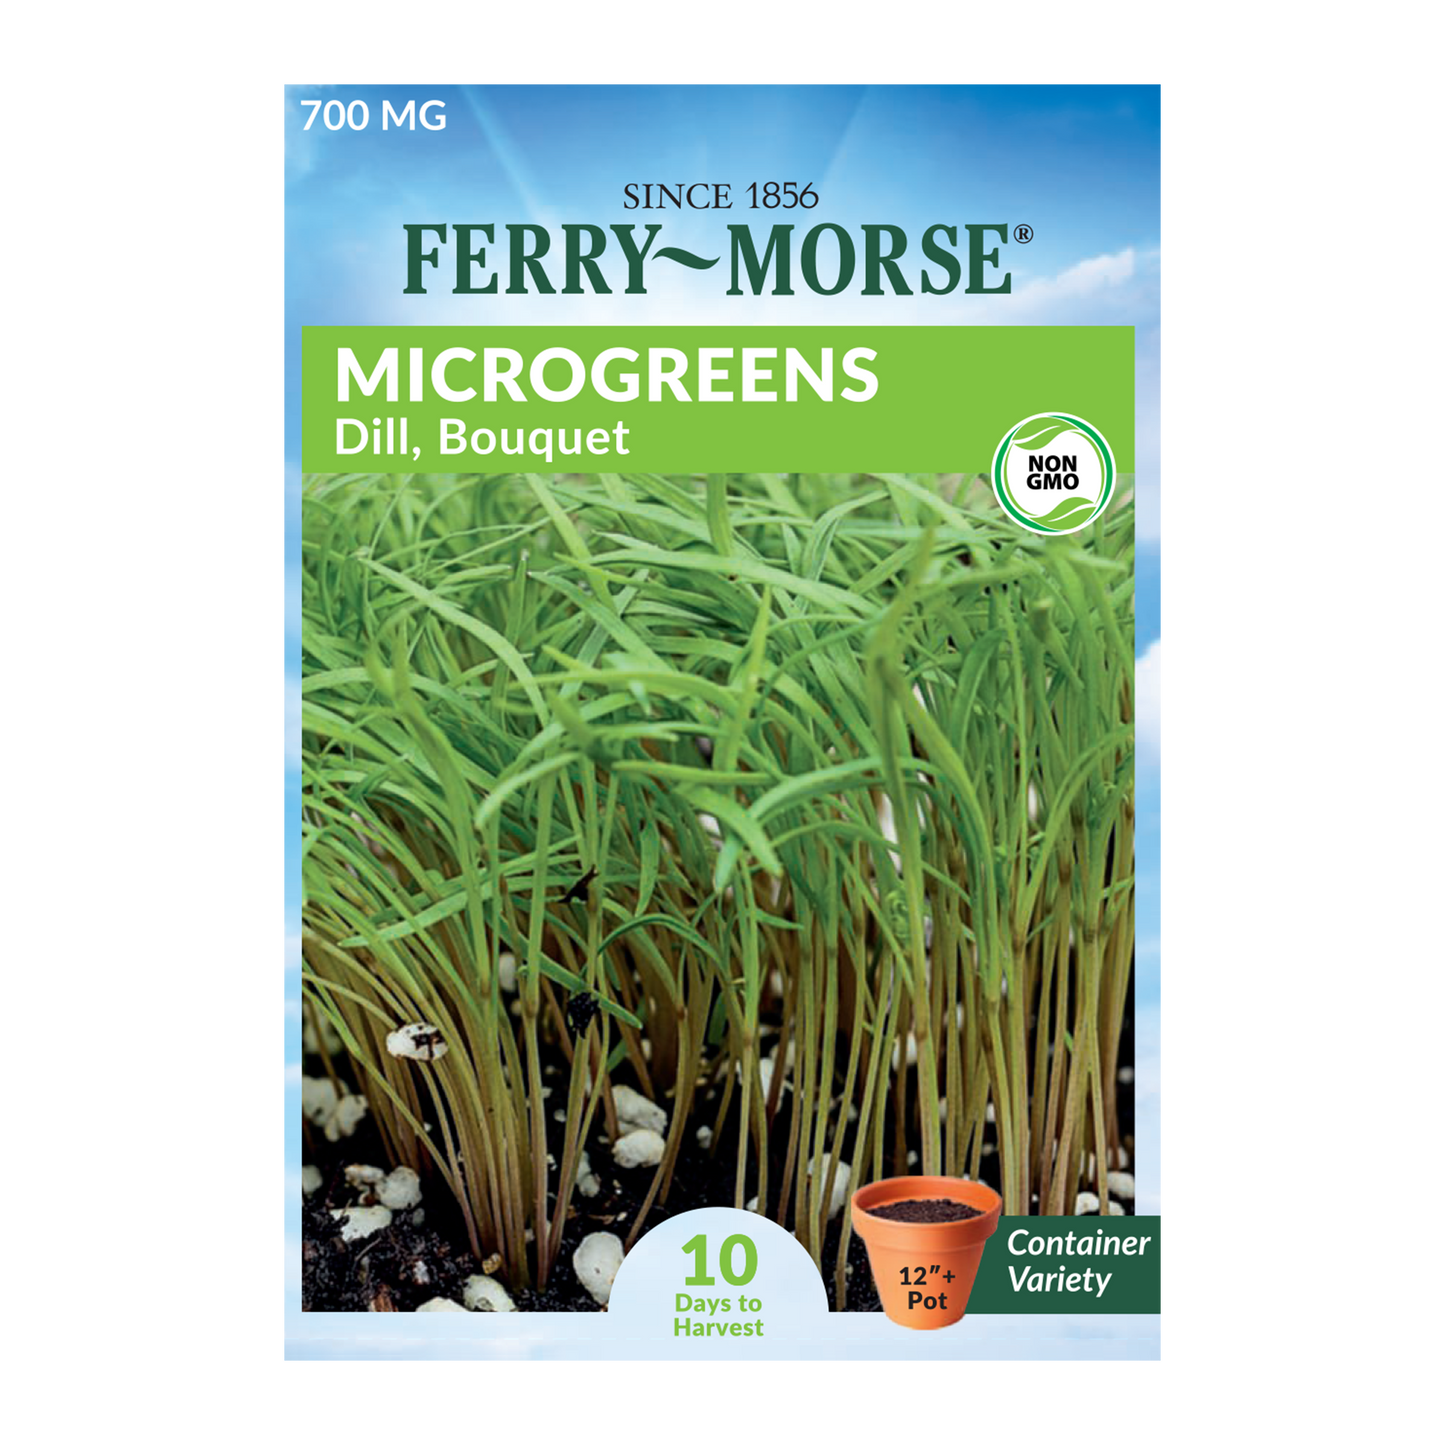 Bouquet Dill Microgreens Seeds from Ferry Morse_Picture displays dill microgreens seed packet with long slim sprouts that have feathery leaves, great garnish.